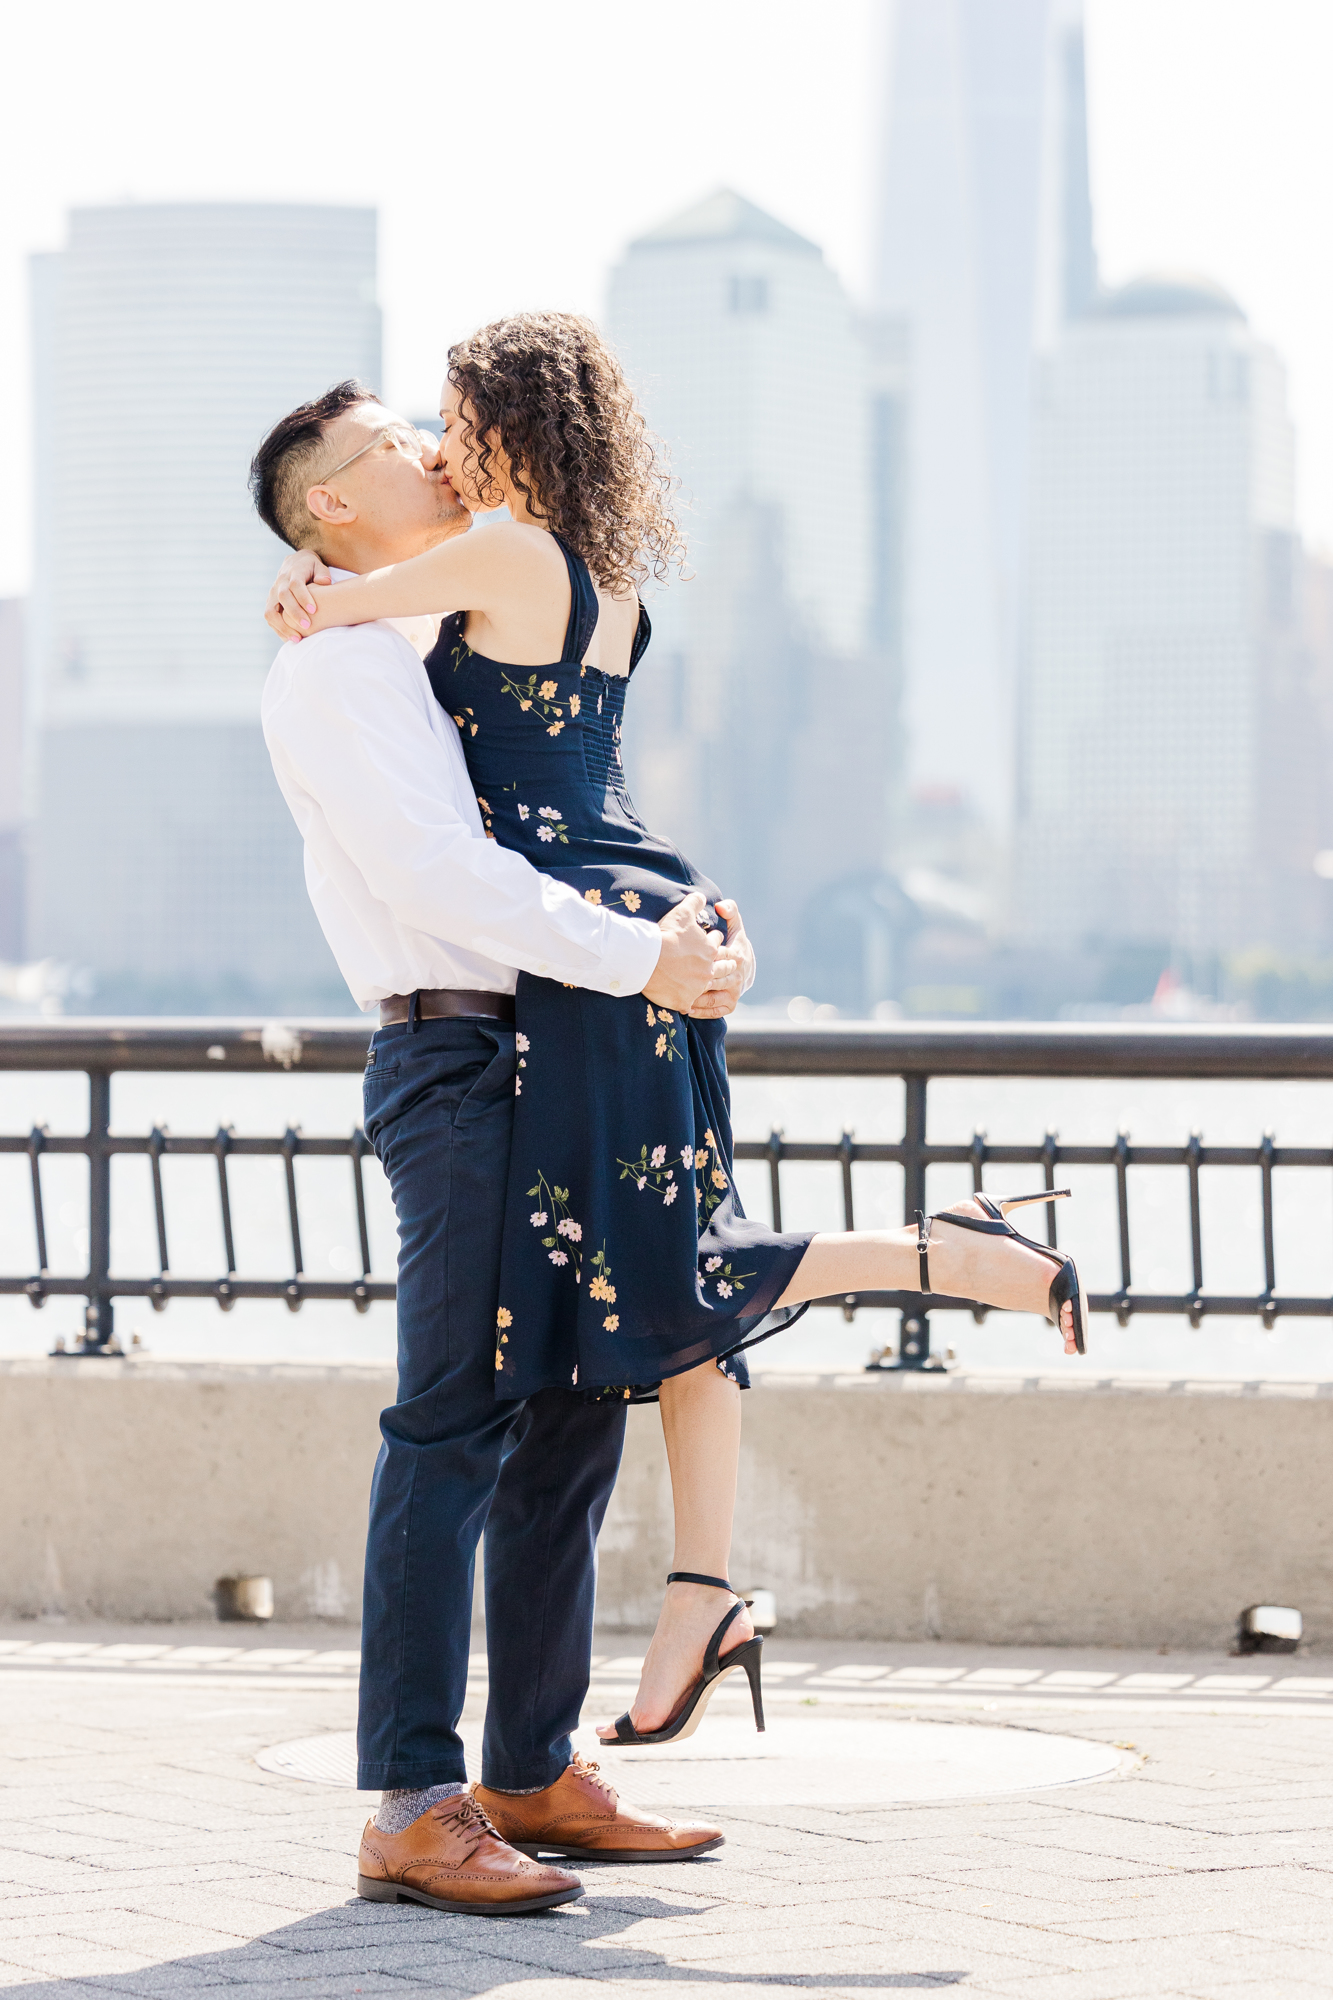 Timeless Skyline Engagement Photos in Jersey City